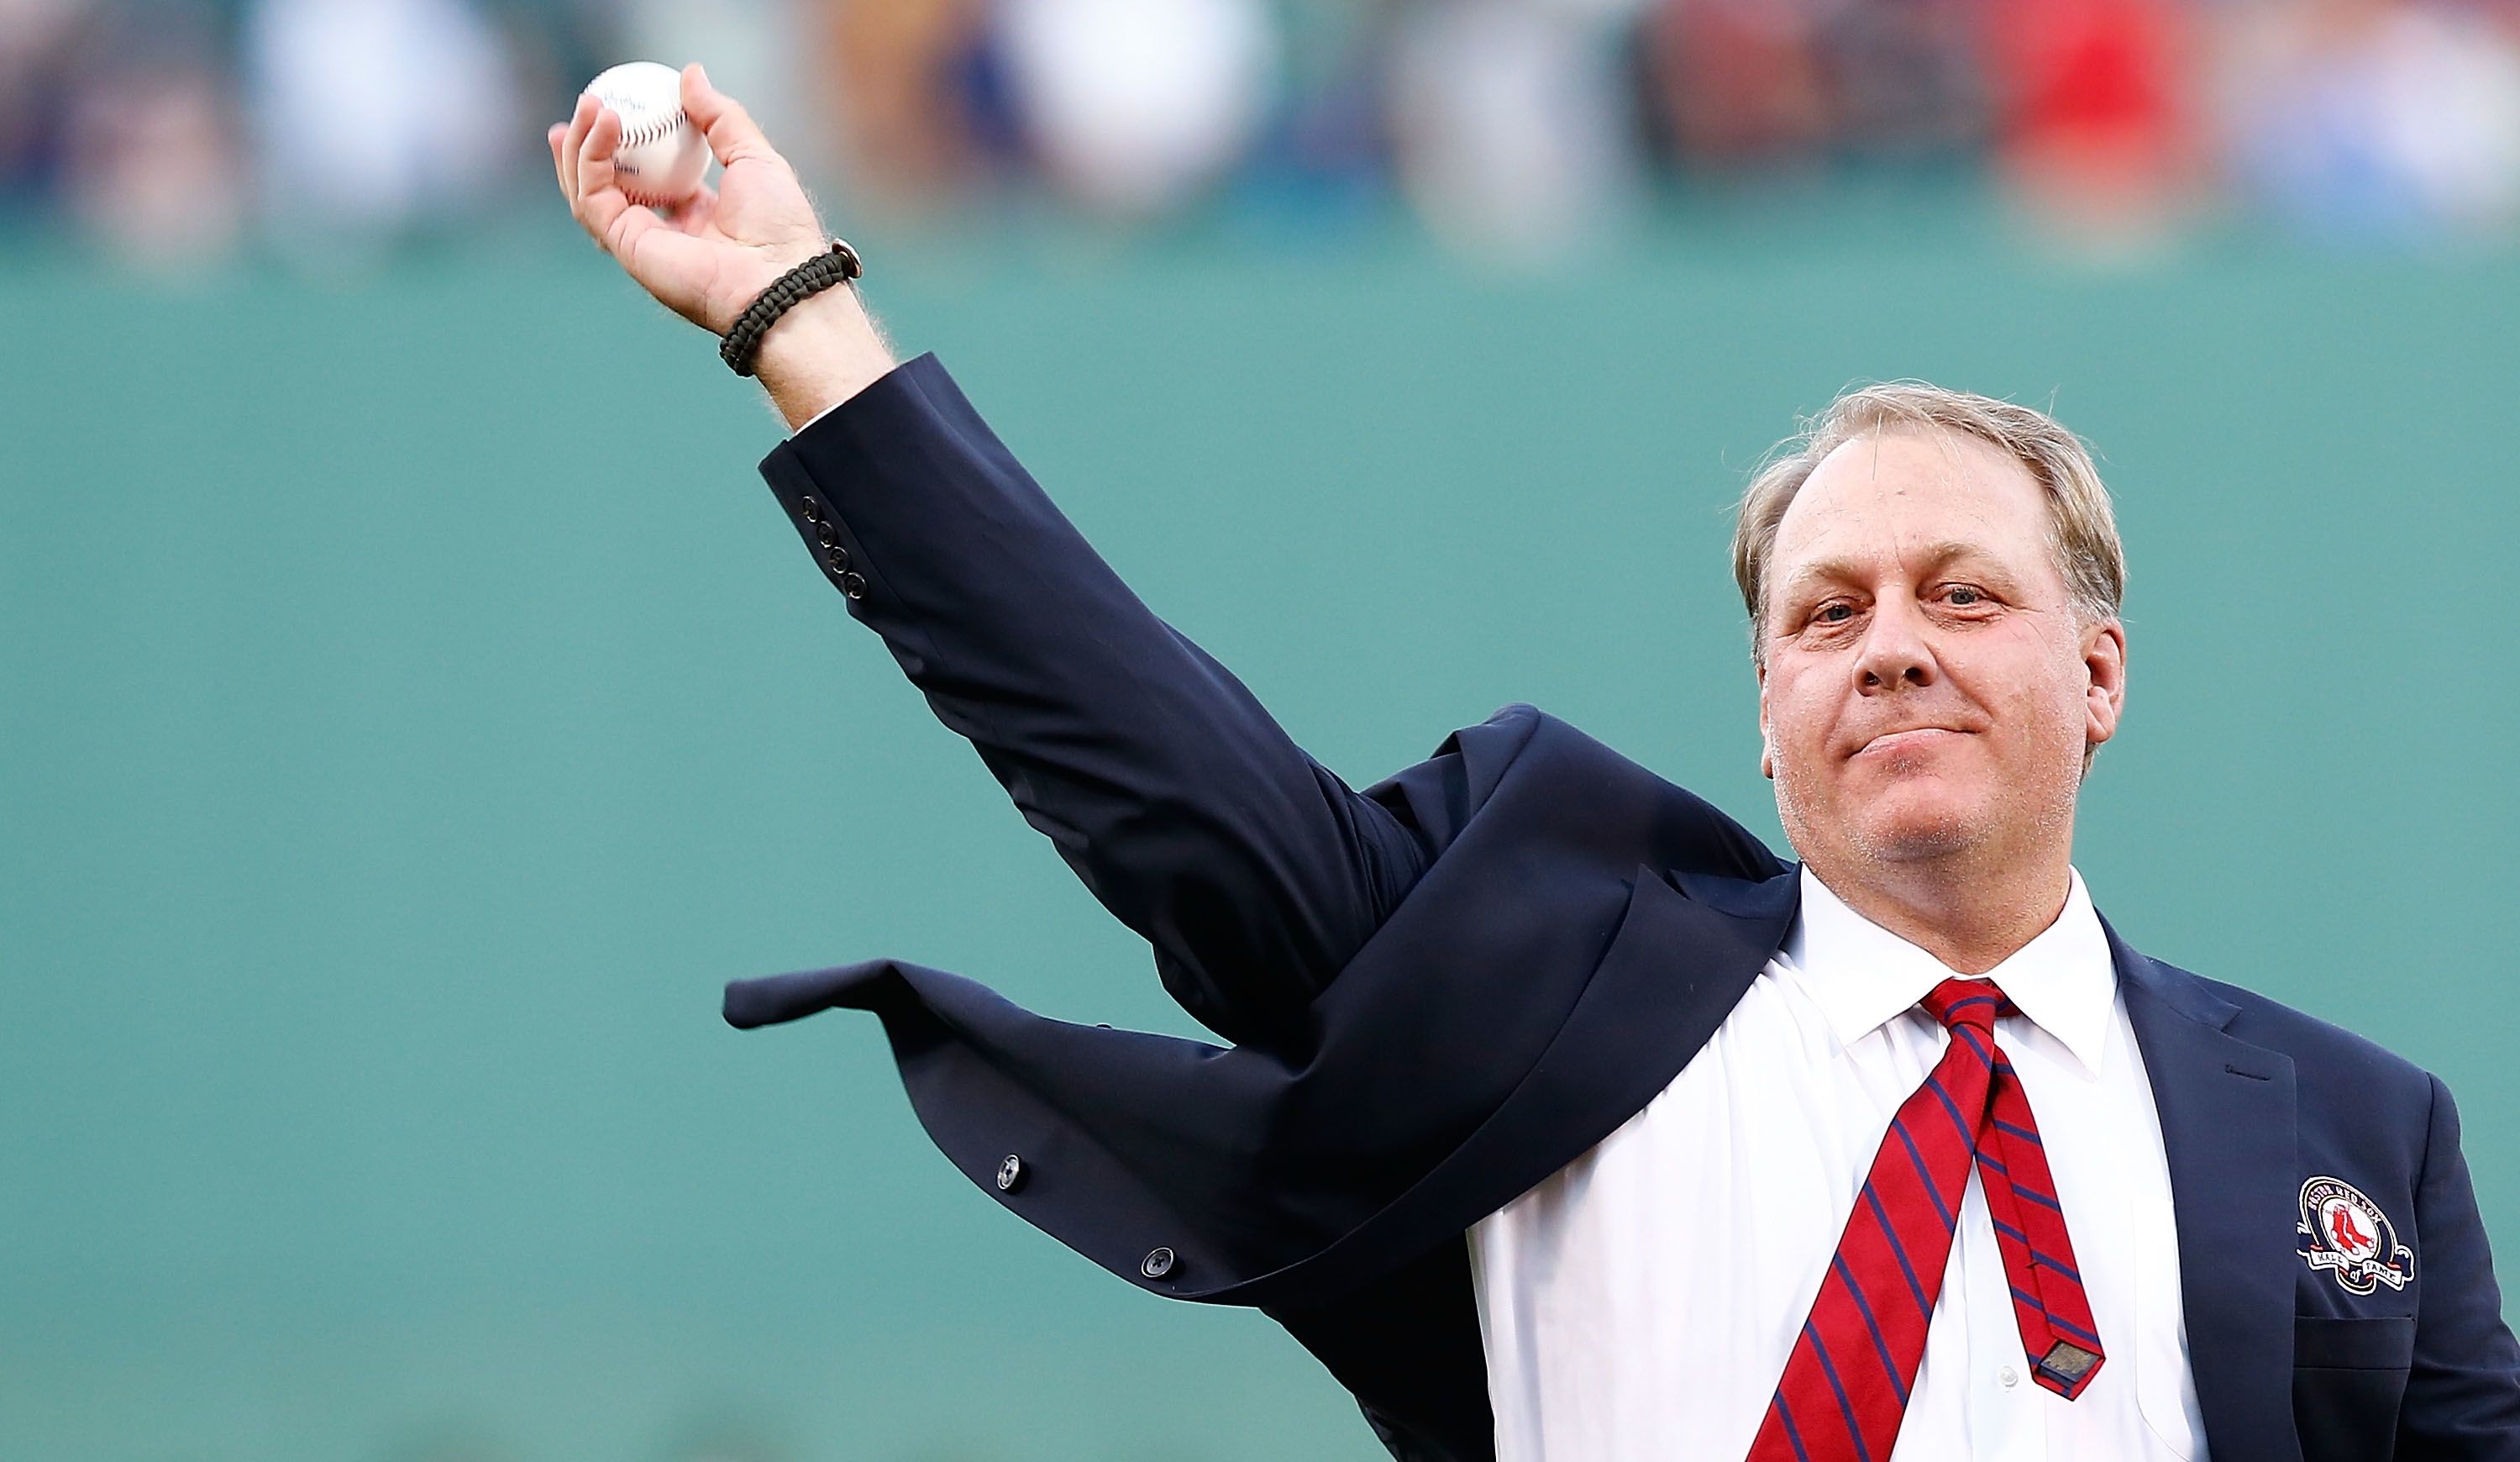 Yankees employee fired for vulgar tweets about Curt Schilling's daughter